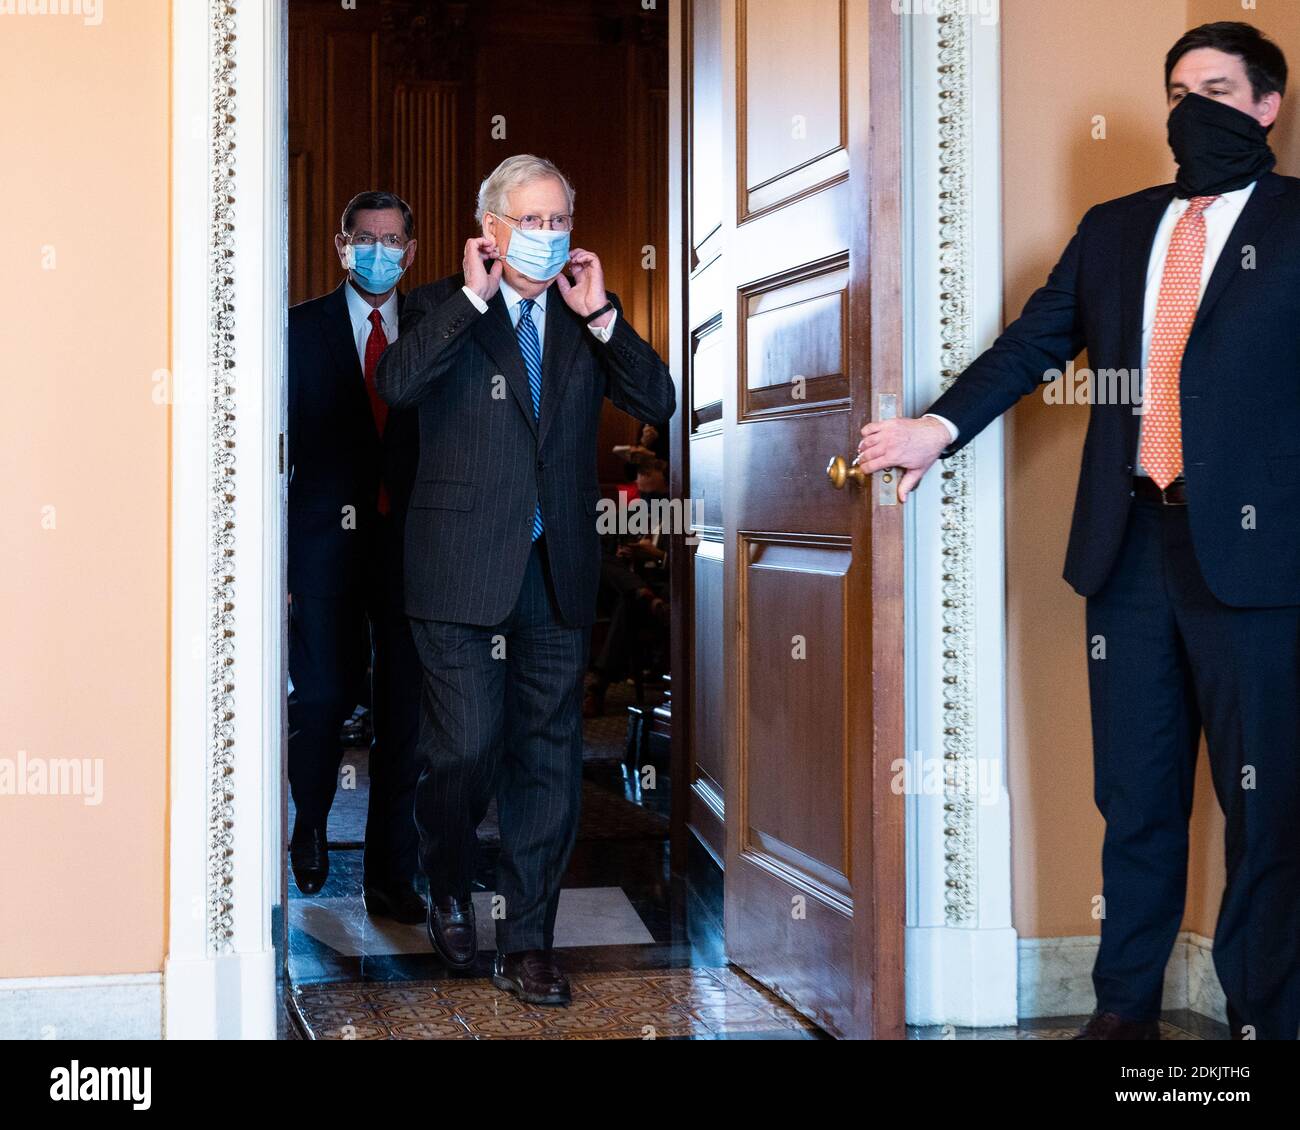 United States:  Senate Majority Leader Mitch McConnell, (R-KY) adjusting his face mask as he is leaving a press conference. Stock Photo